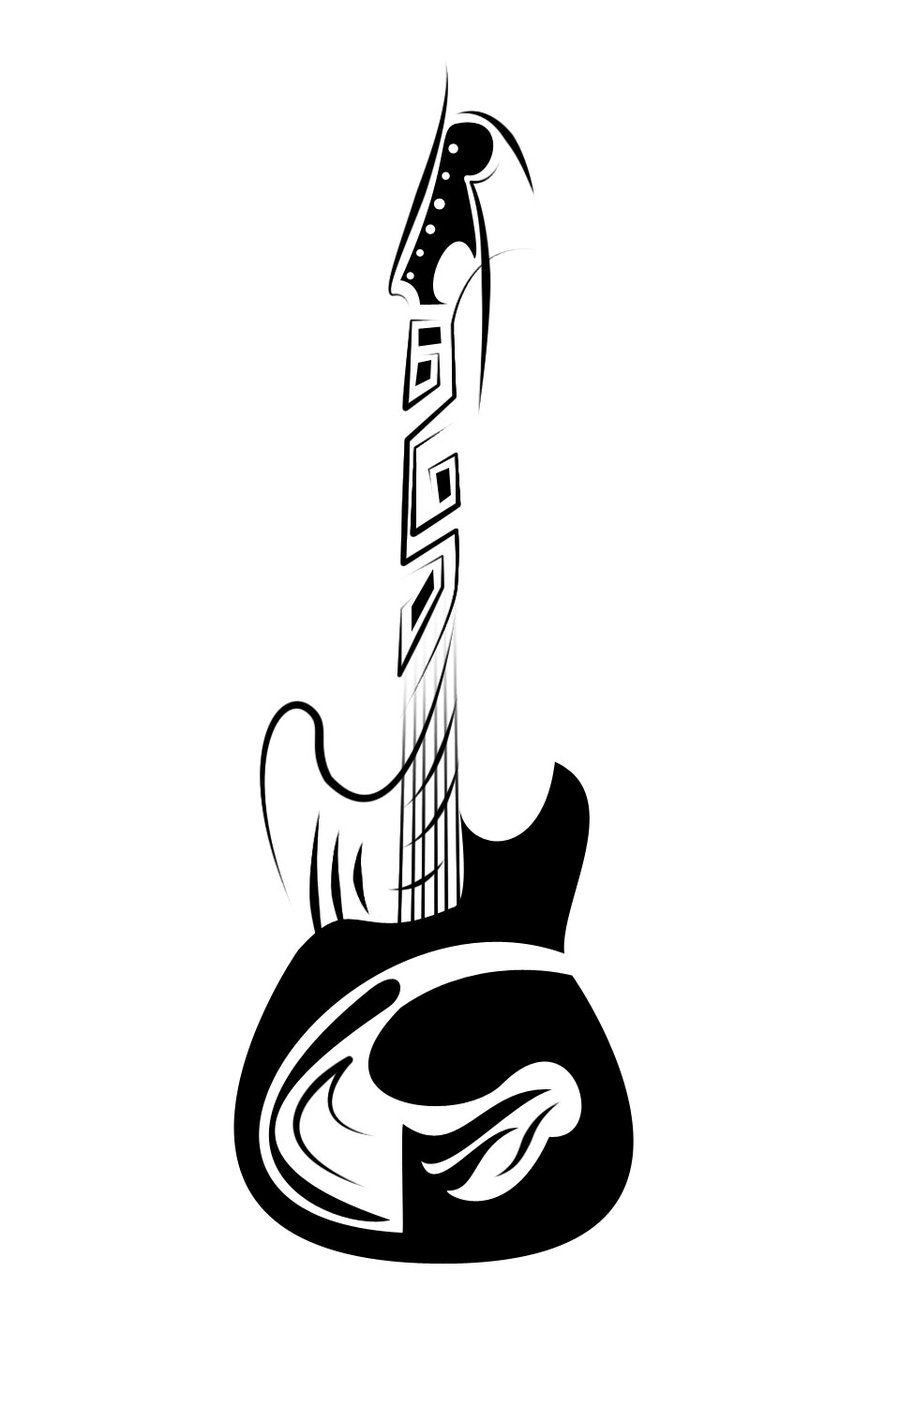 Guitar Tattoos Designs, Ideas and Meaning | Tattoos For You